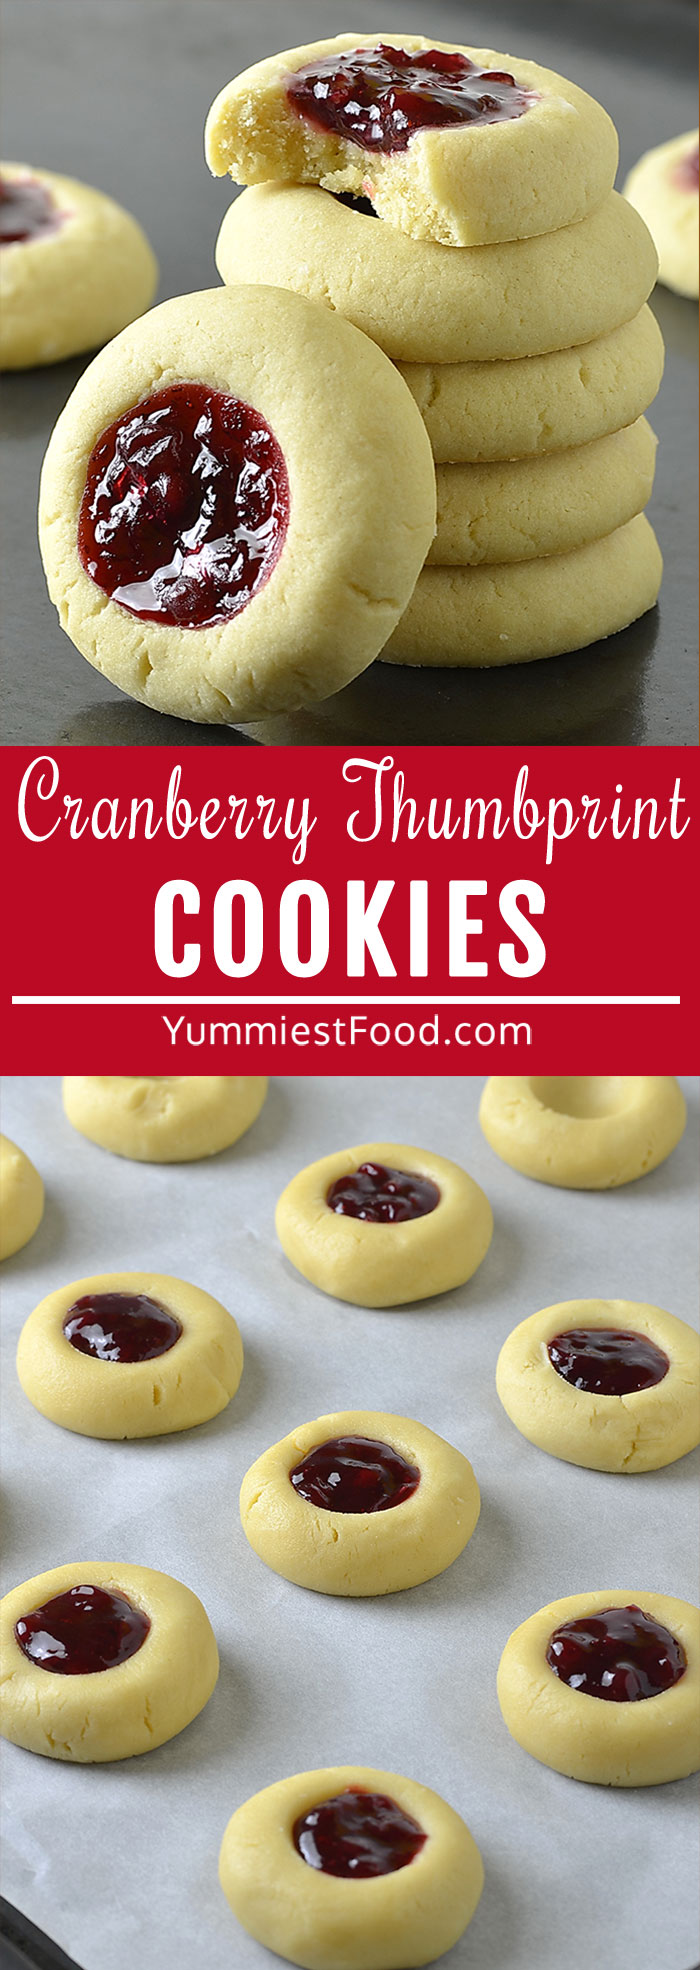 Cranberry Thumbprint cookies are buttery little cookies filled with sauce. They’re a classic cookie recipe to make for any holiday party or cookie exchange!